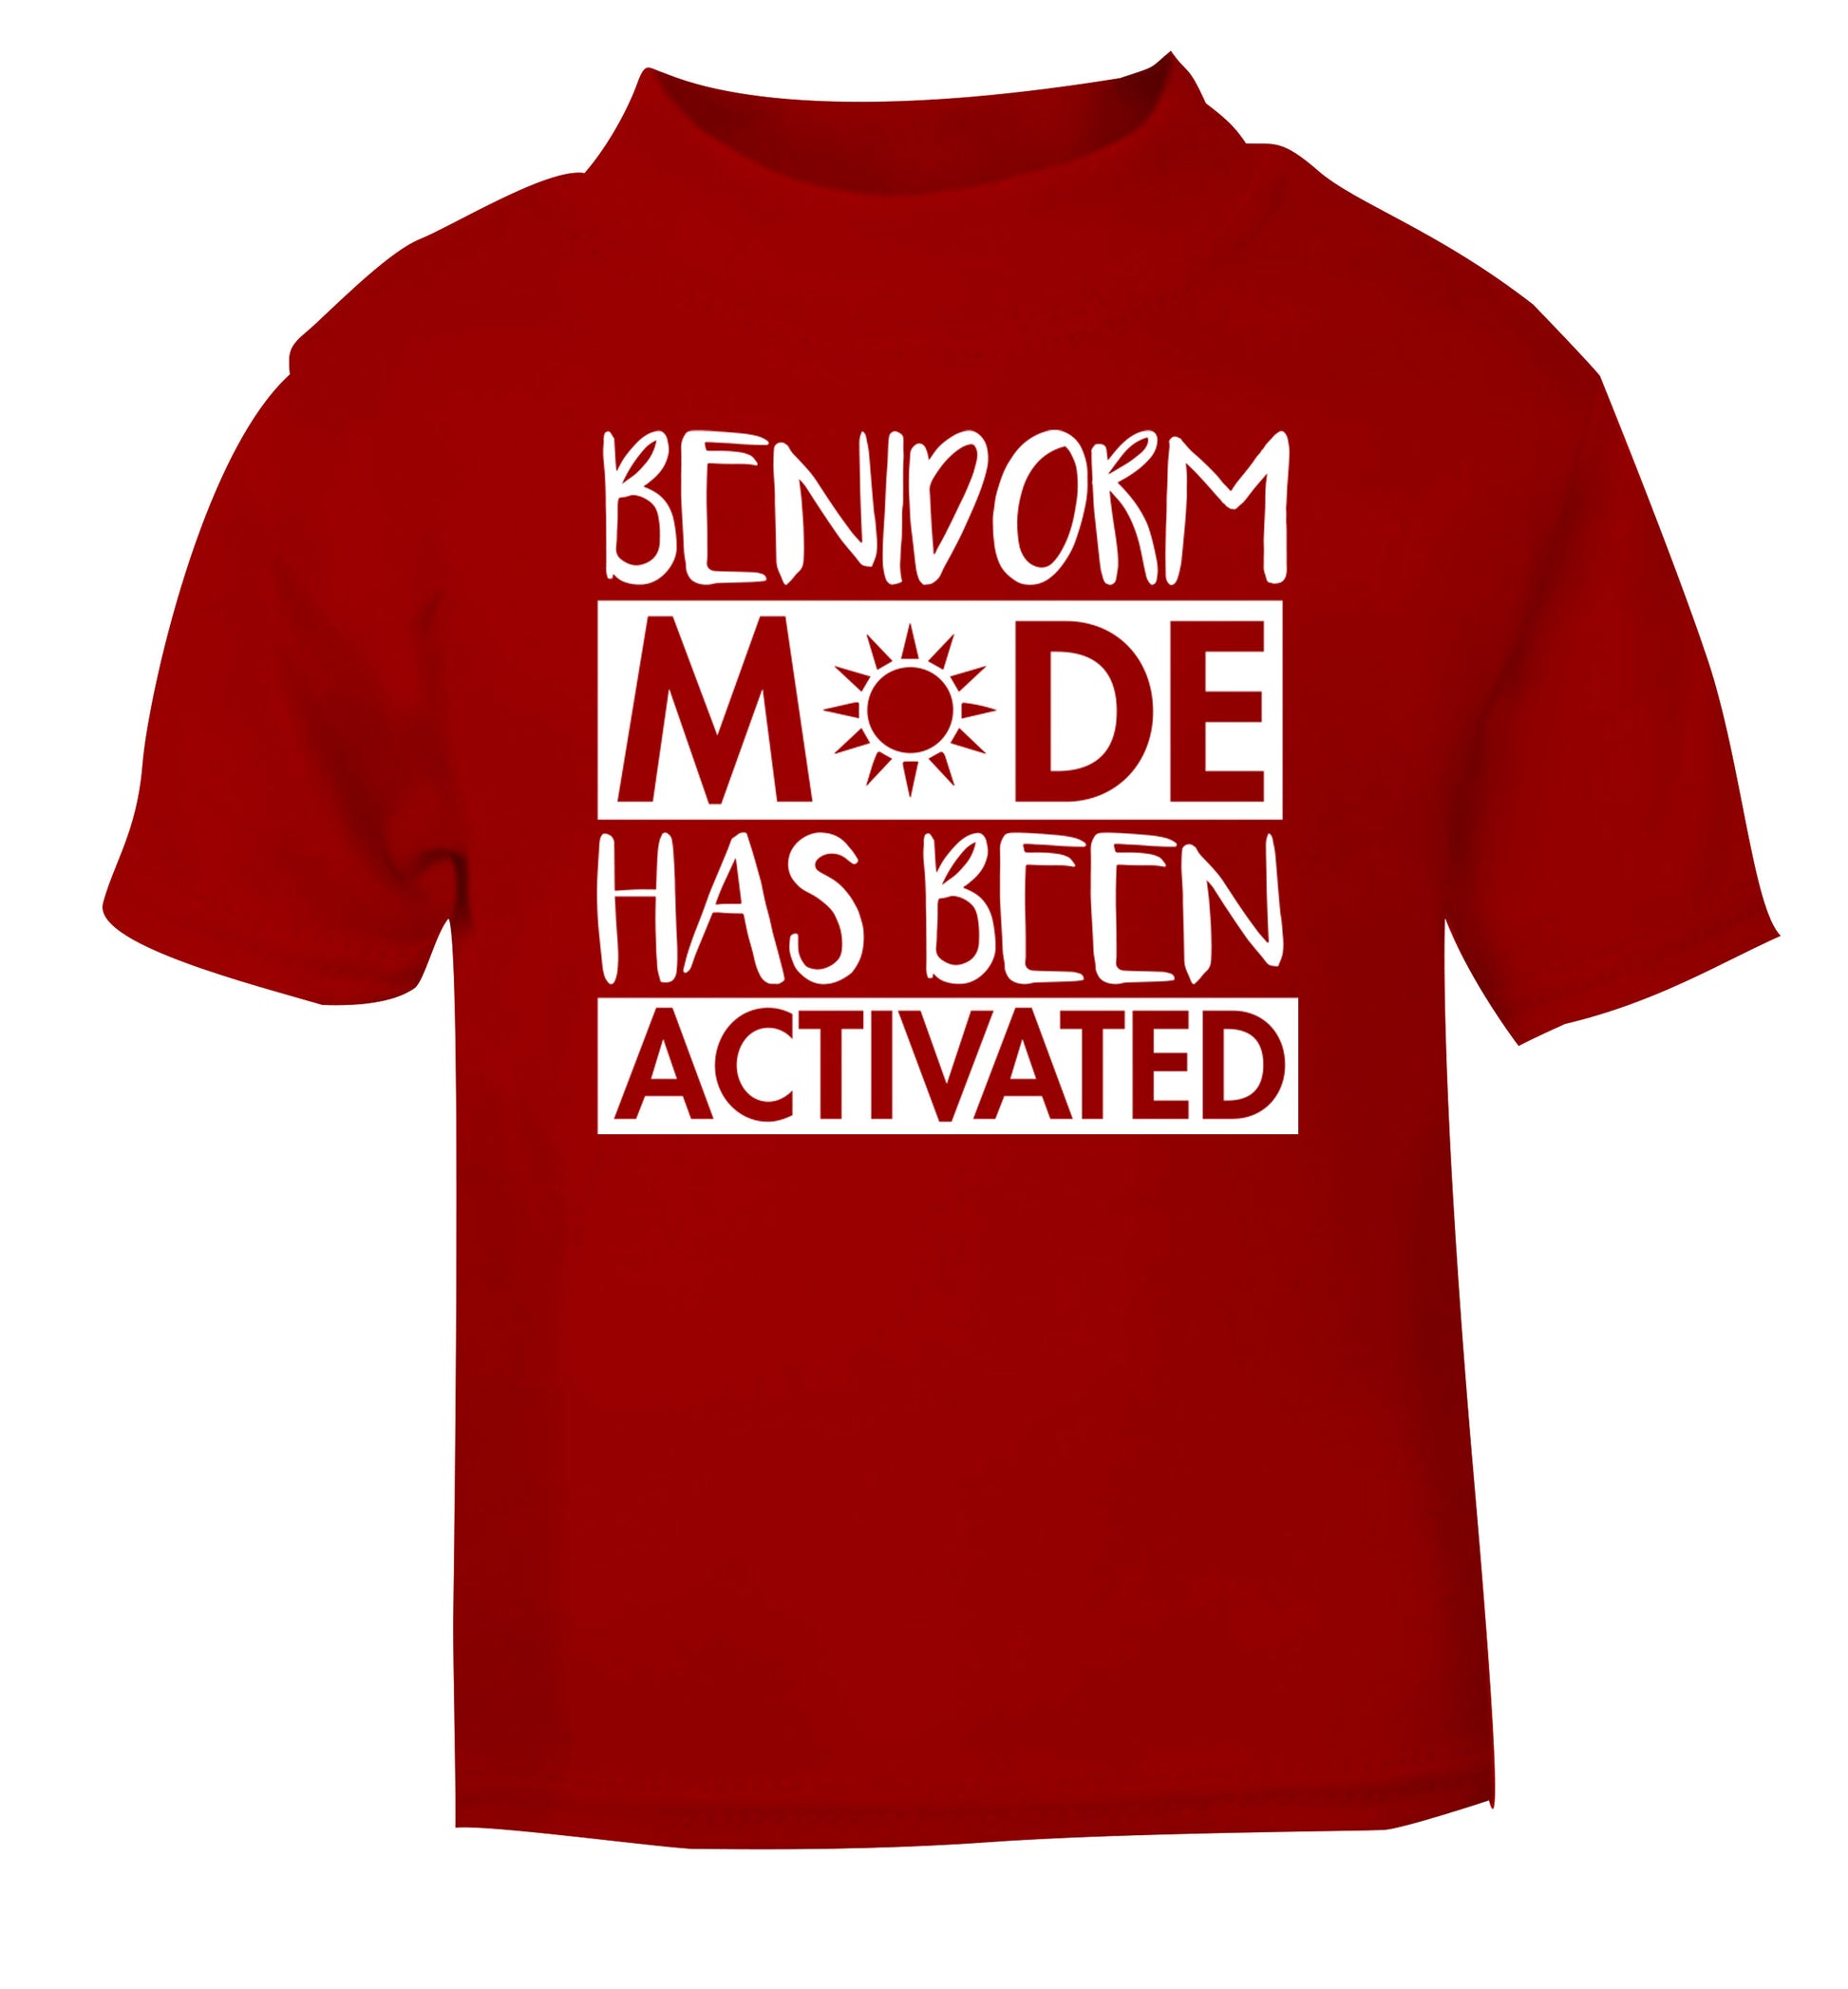 Benidorm mode has been activated red Baby Toddler Tshirt 2 Years